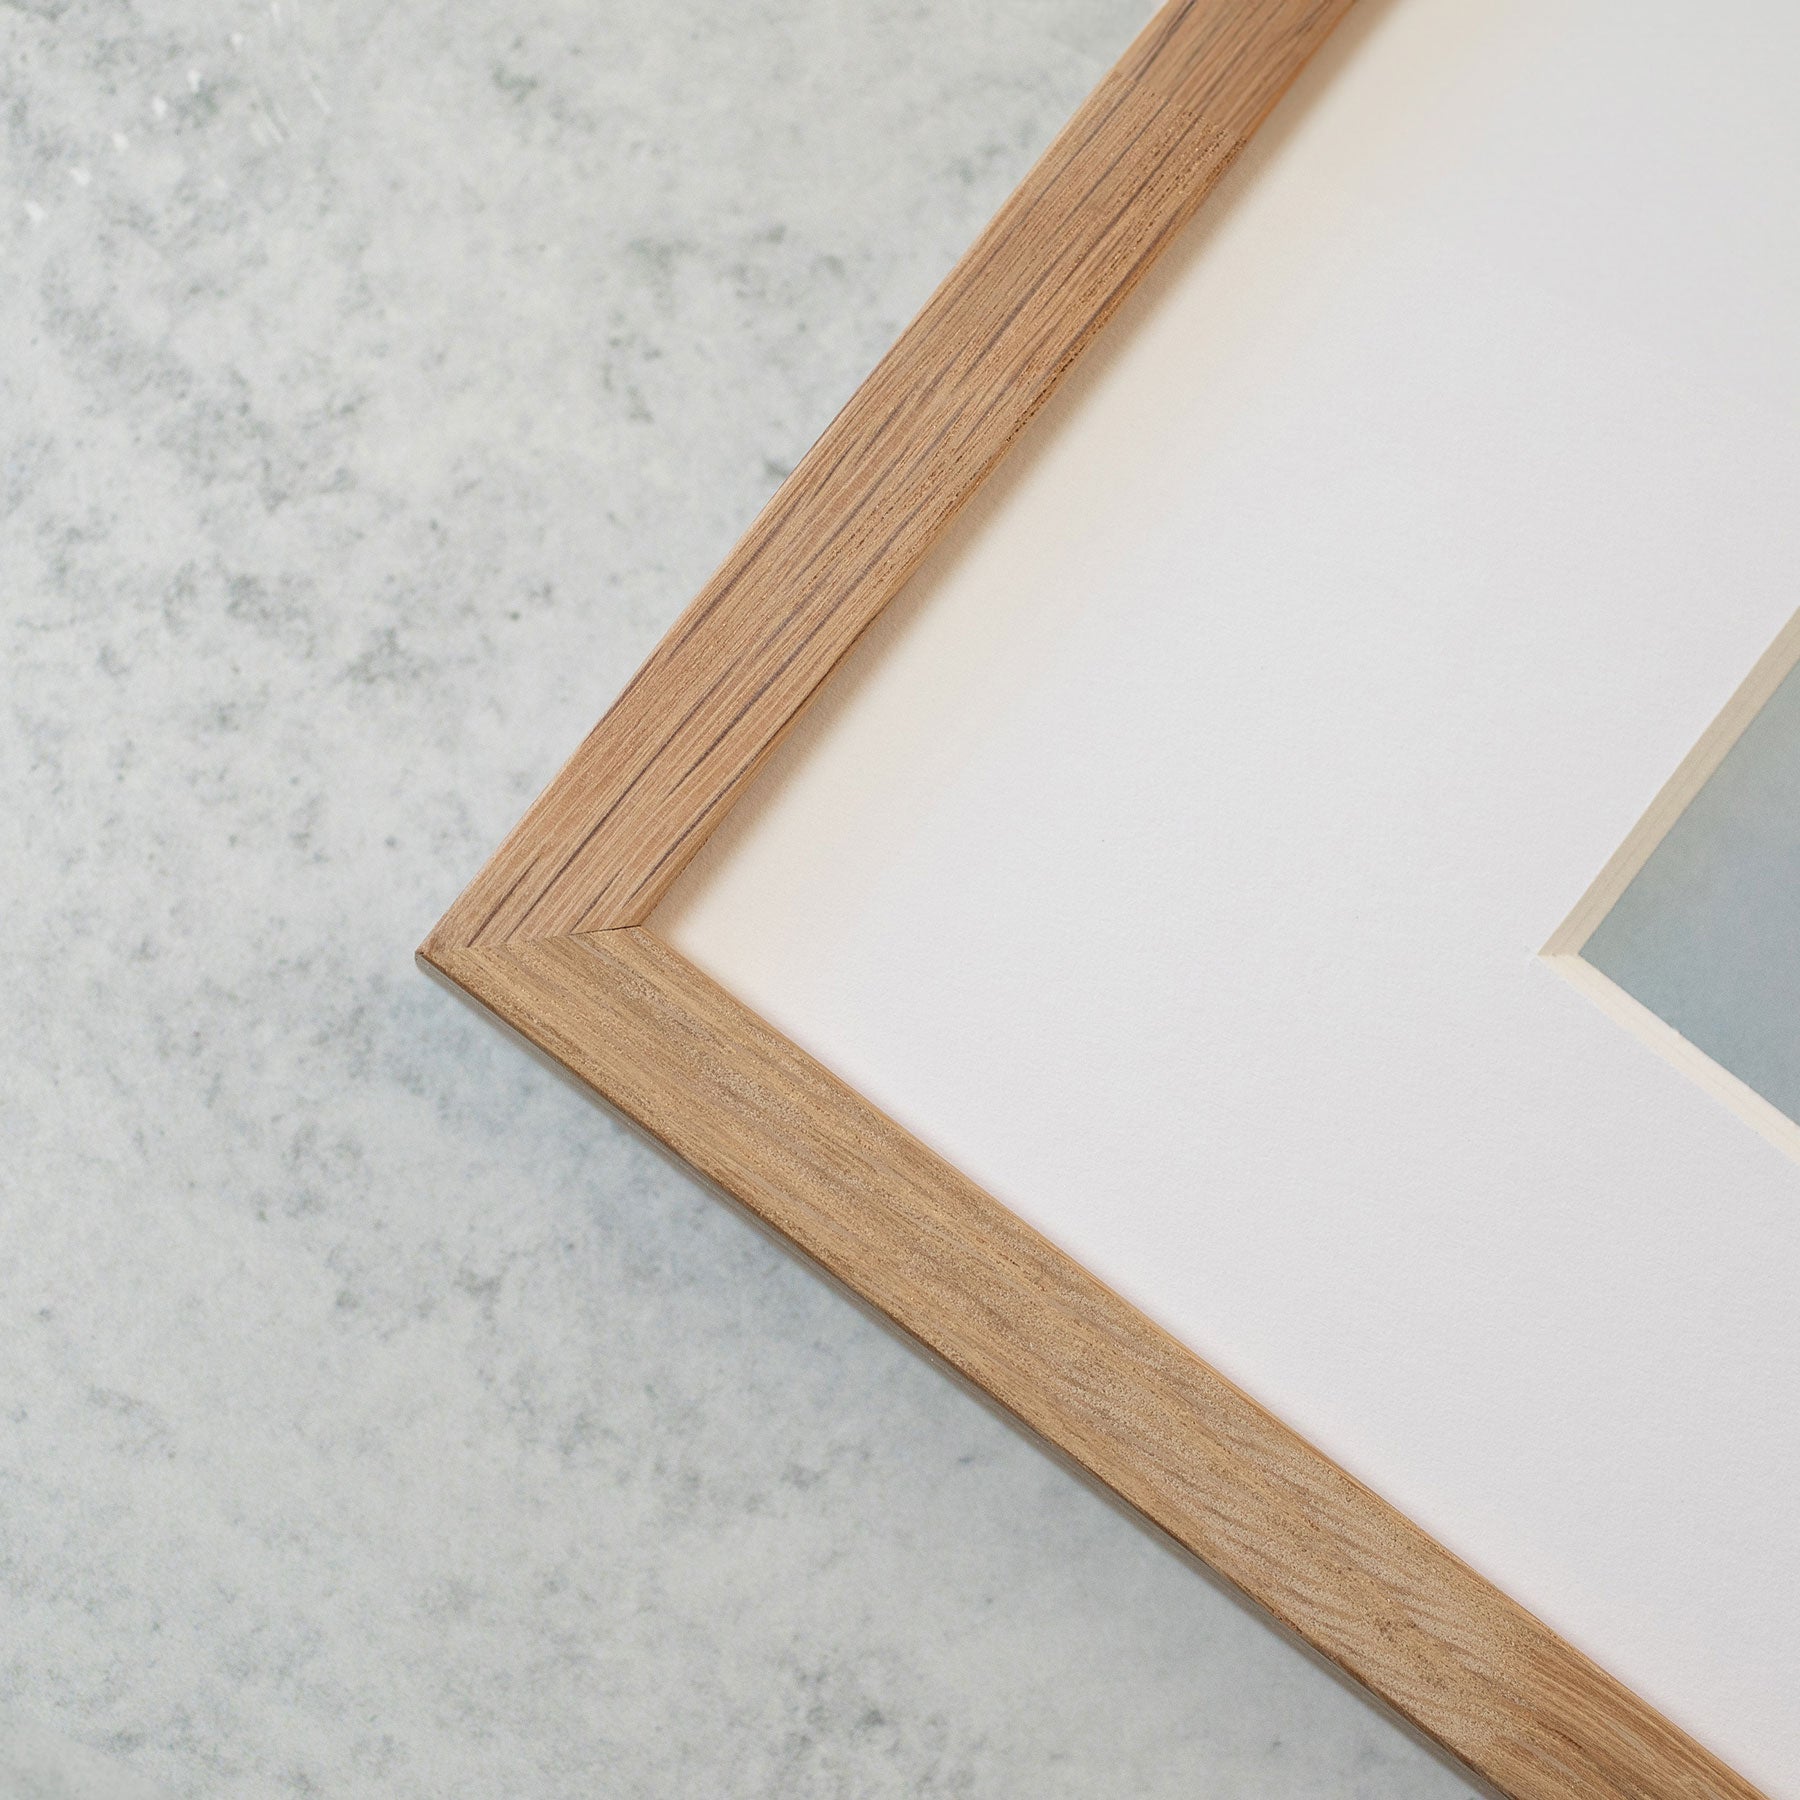 Close-up view of a corner of a wooden picture frame showcasing fine grain details, set on Offley Green archival photographic paper against a light gray textured background.